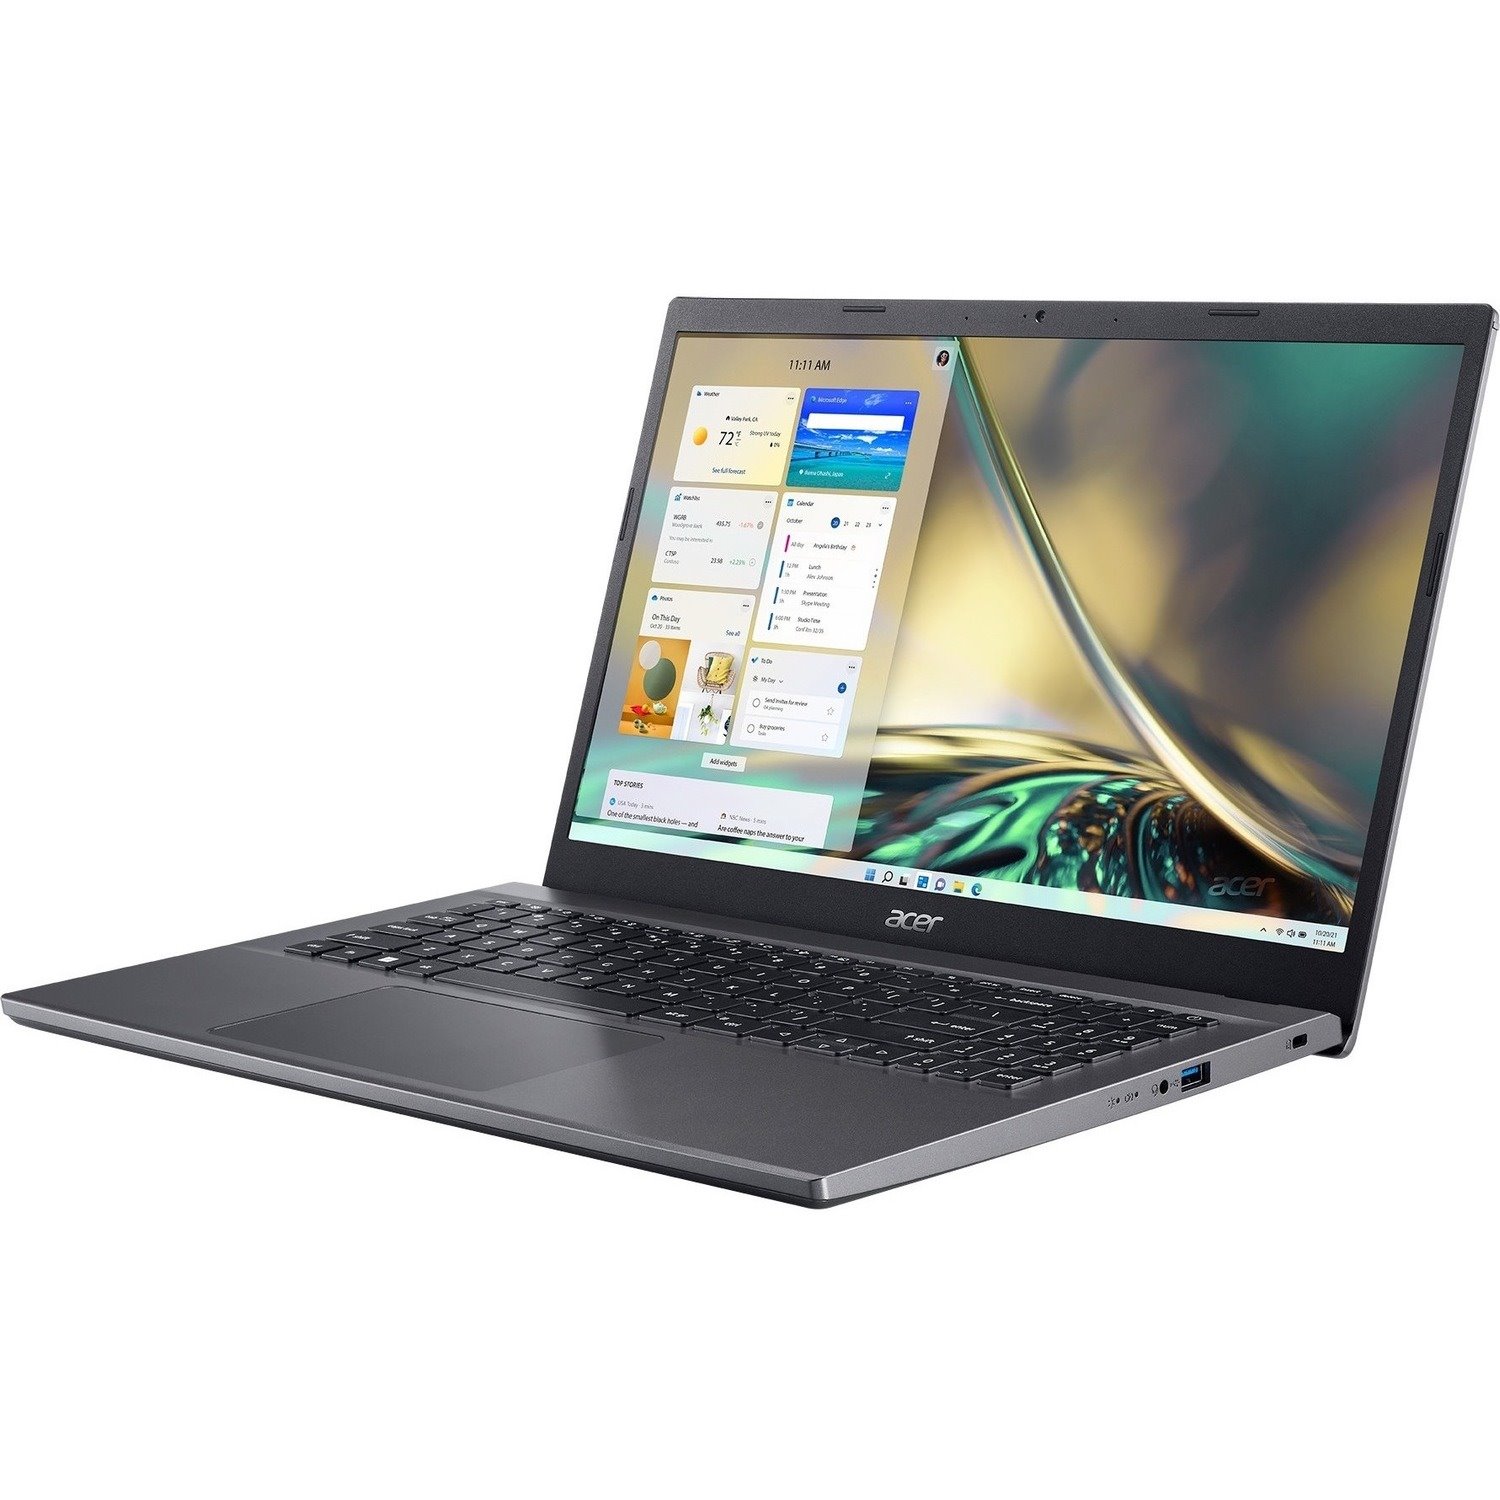 Acer Aspire 5 A515-57 A515-57-5887 15.6" Notebook - Full HD - Intel Core i5 12th Gen i5-1240P - 16 GB - 512 GB SSD - English (US), French Keyboard